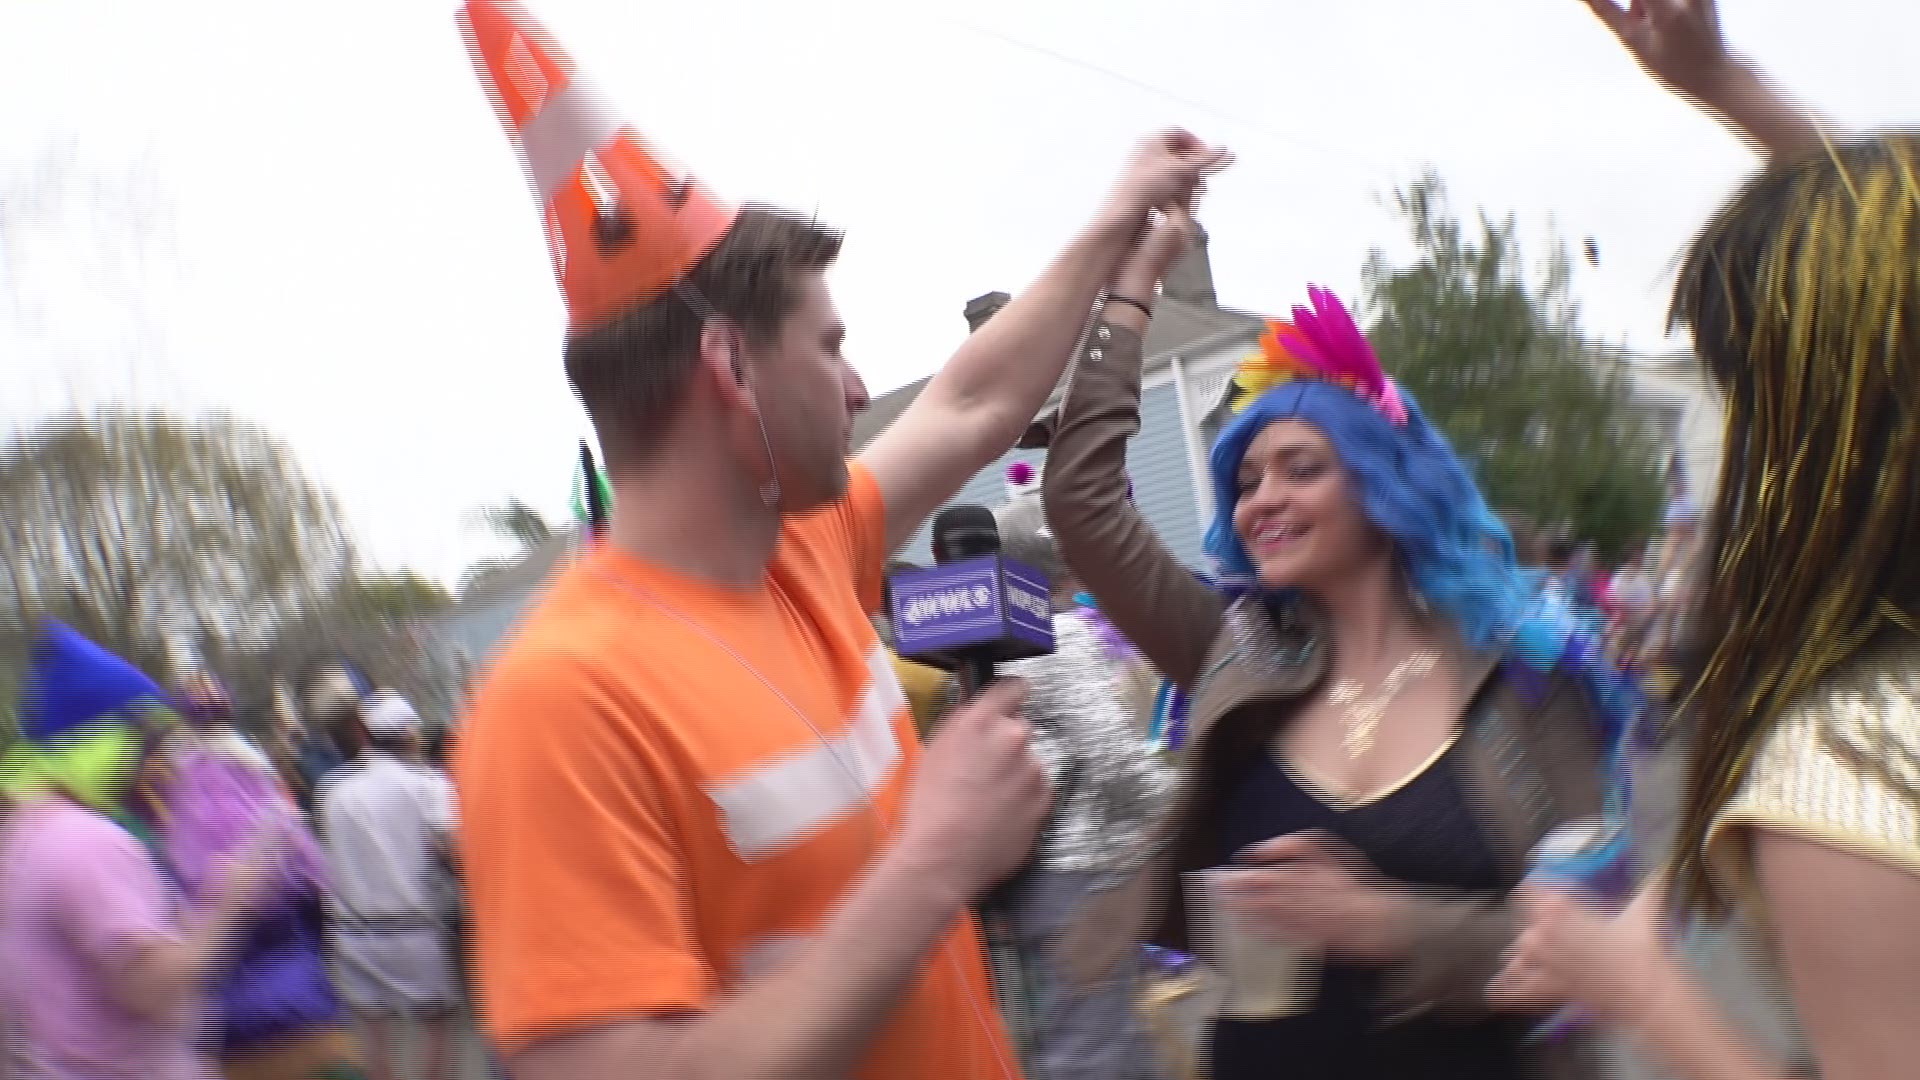 WWLTV's Paul Dudley and Devin Bartolotta celebrated with Mardi Gras goers in the Marigny area in New Orleans.